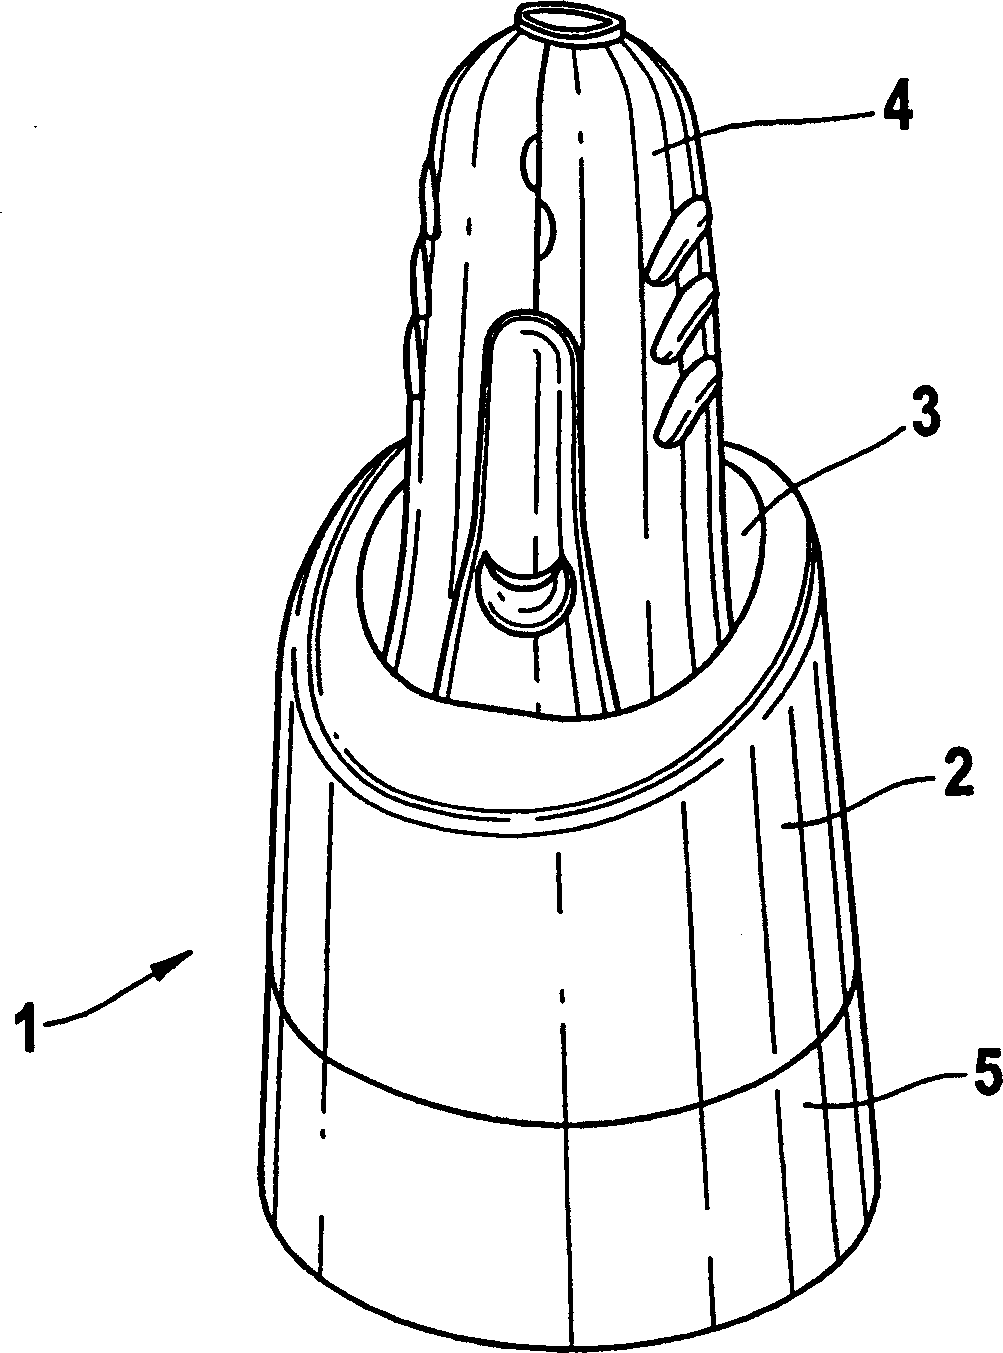 Electric cleaning device for a shaving apparatus